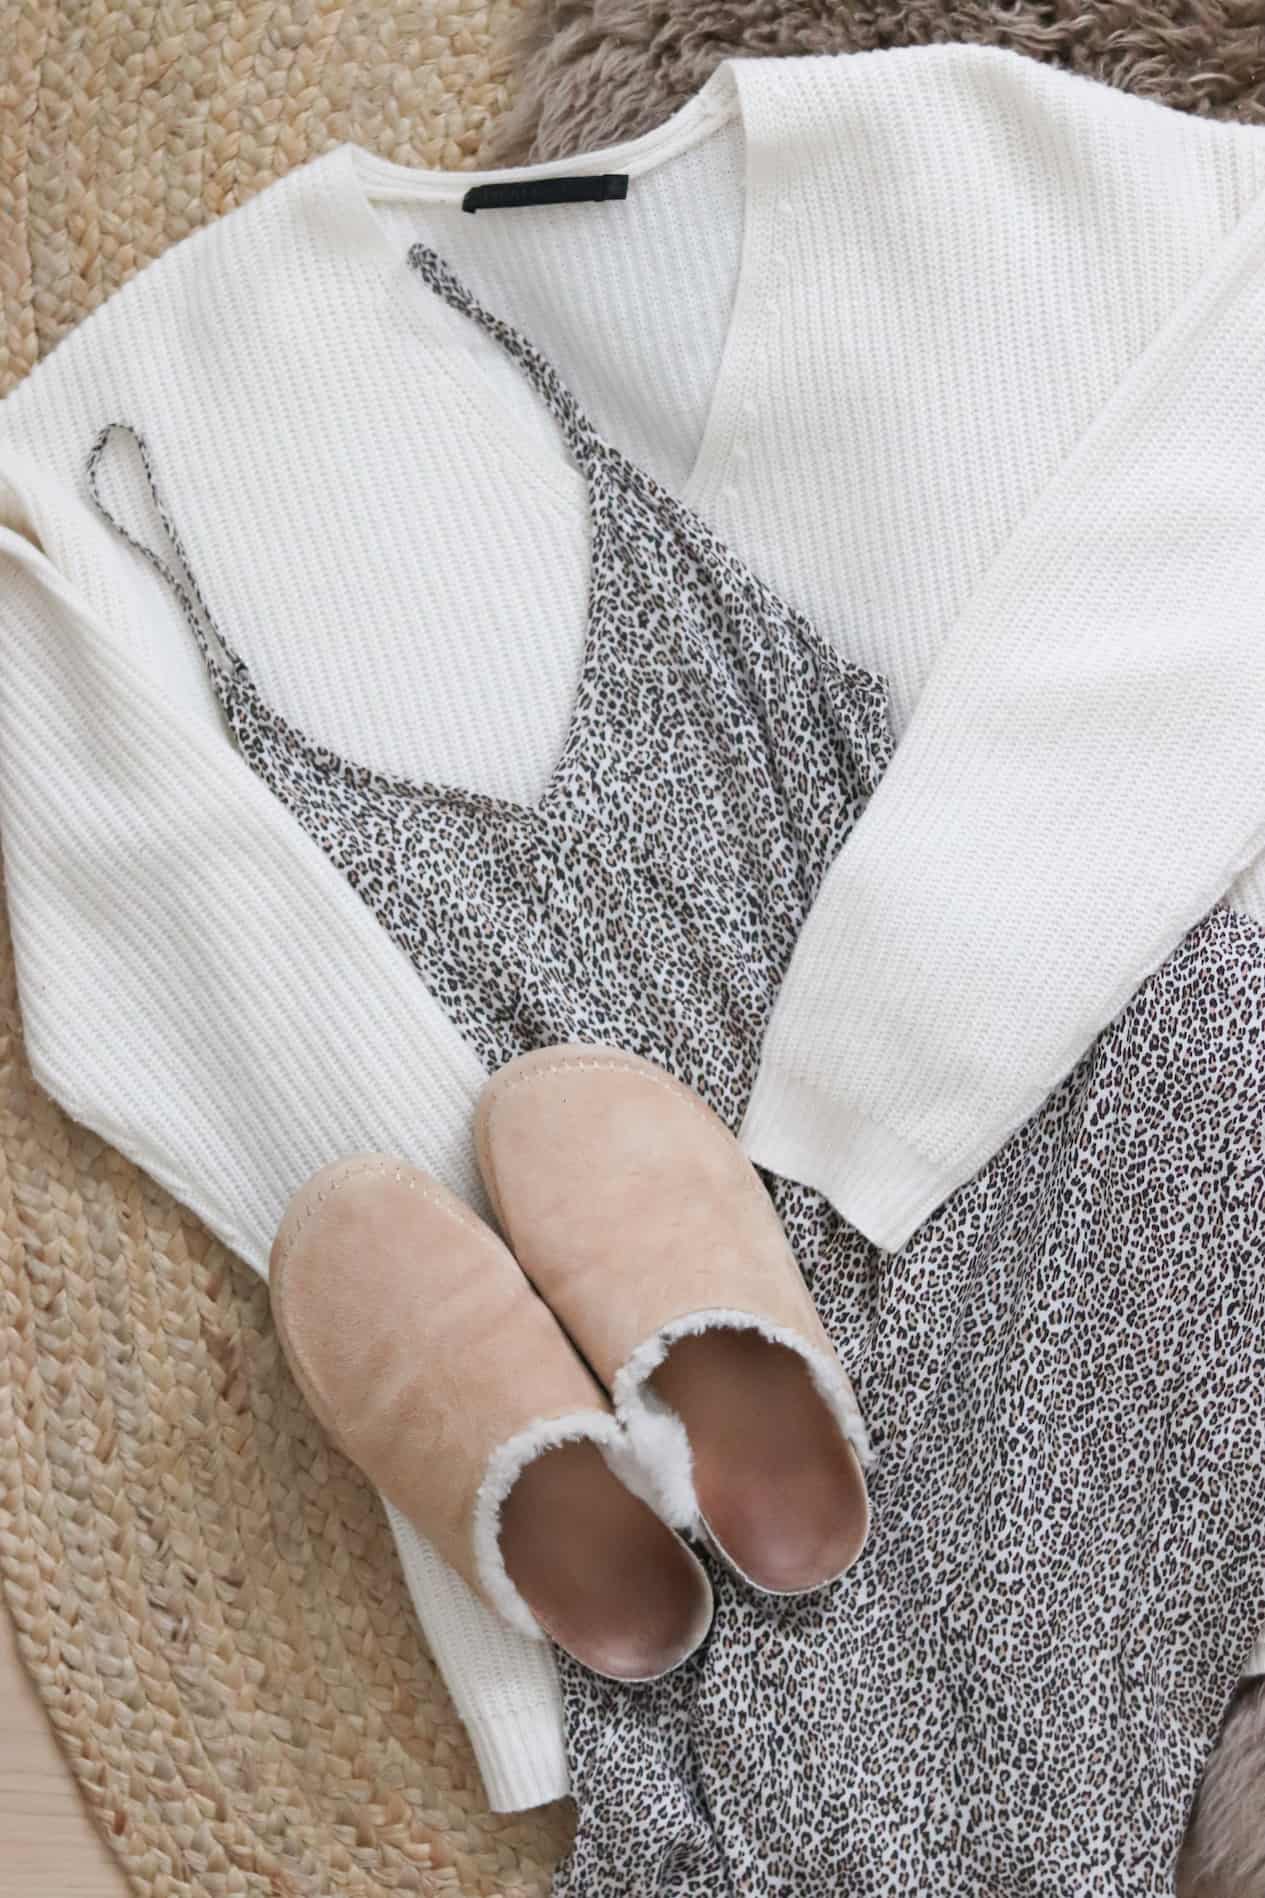 Flat lay of a white sweater, animal print spaghetti strap dress and cozy slippers.